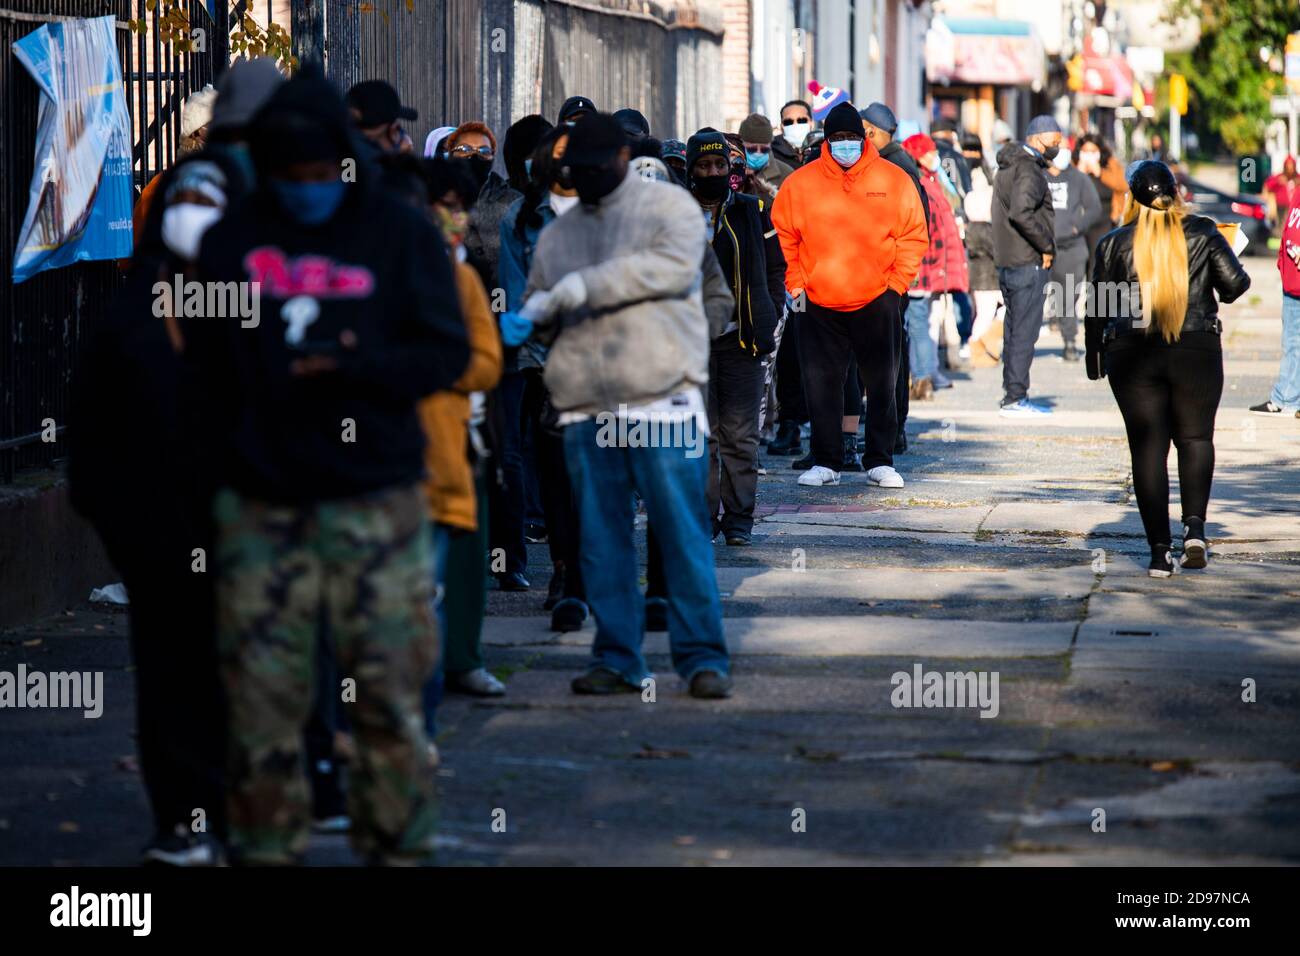 Philadelphia, USA. 3rd November, 2020. A man who did not wish to be identified waits in line to vote at a polling location at the Happy Hollow Recreational Center in Germantown, Philadelphia. Credit: Christopher Evens/Alamy Live News Stock Photo